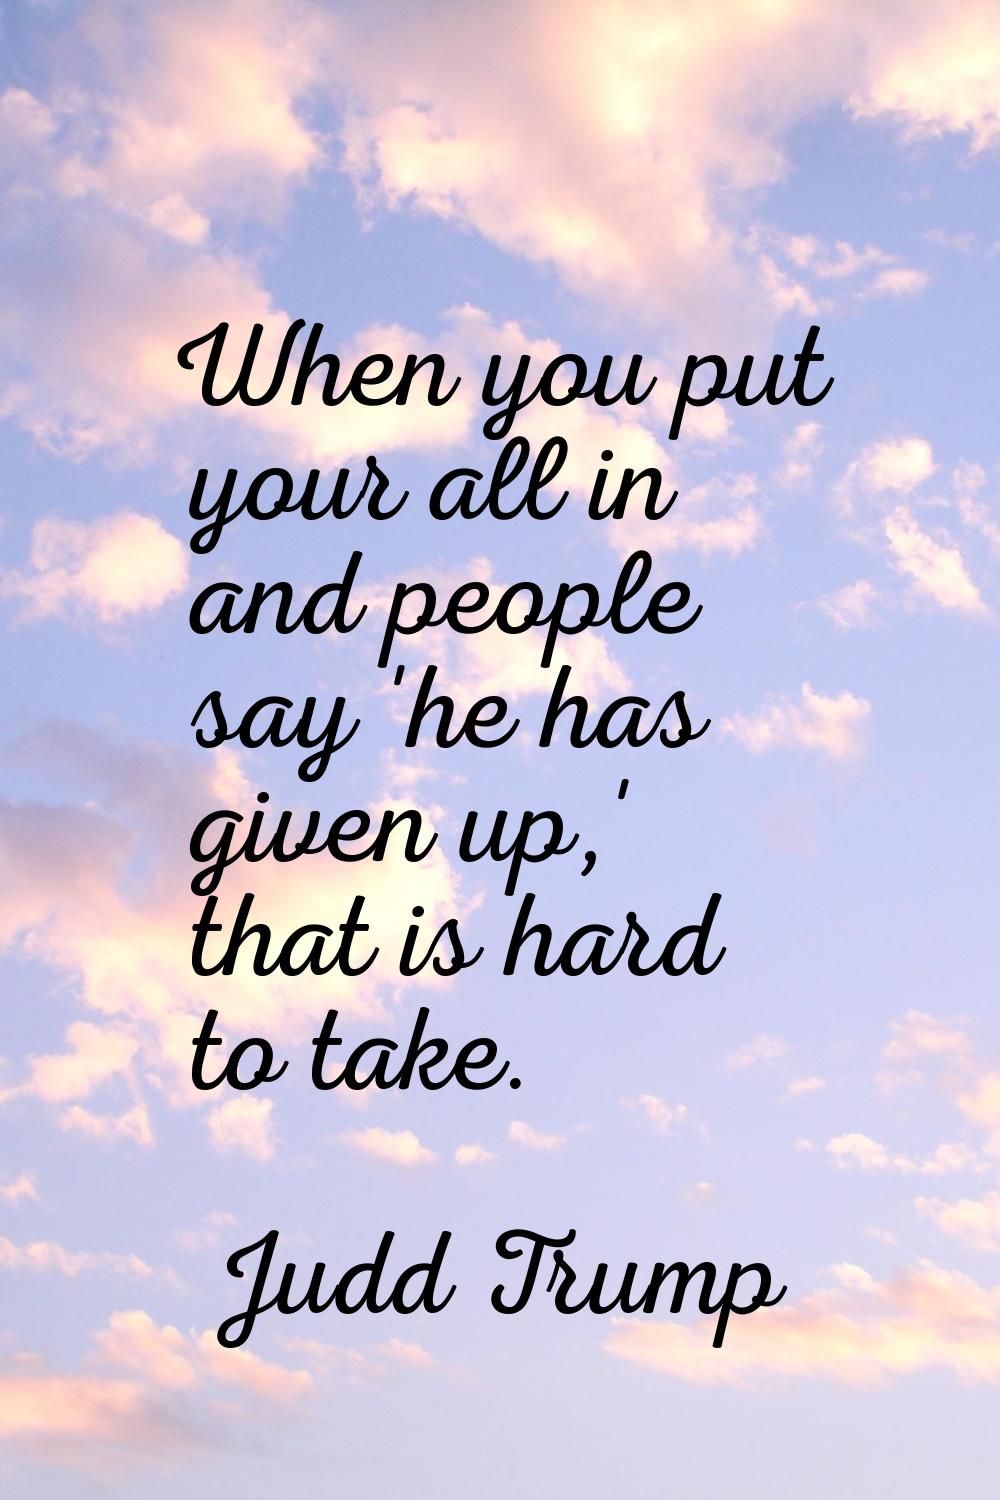 When you put your all in and people say 'he has given up,' that is hard to take.